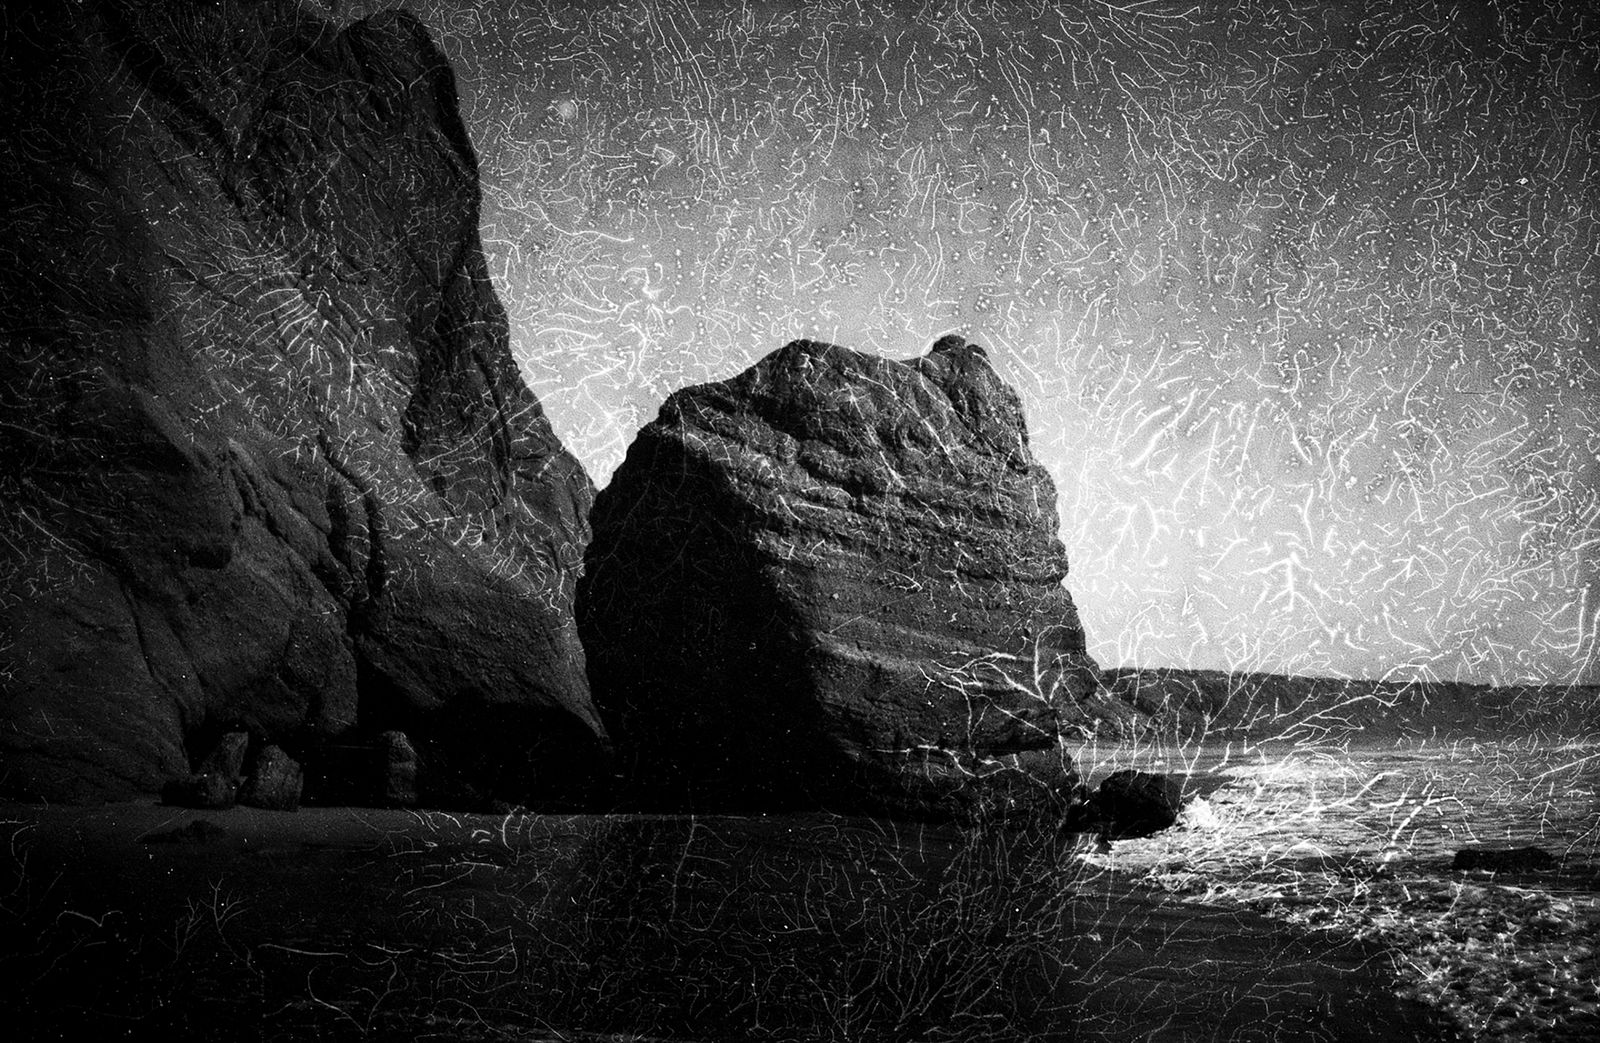 © Freisy González Portales - Image from the The sea of ​​oblivion - El mar del olvido photography project